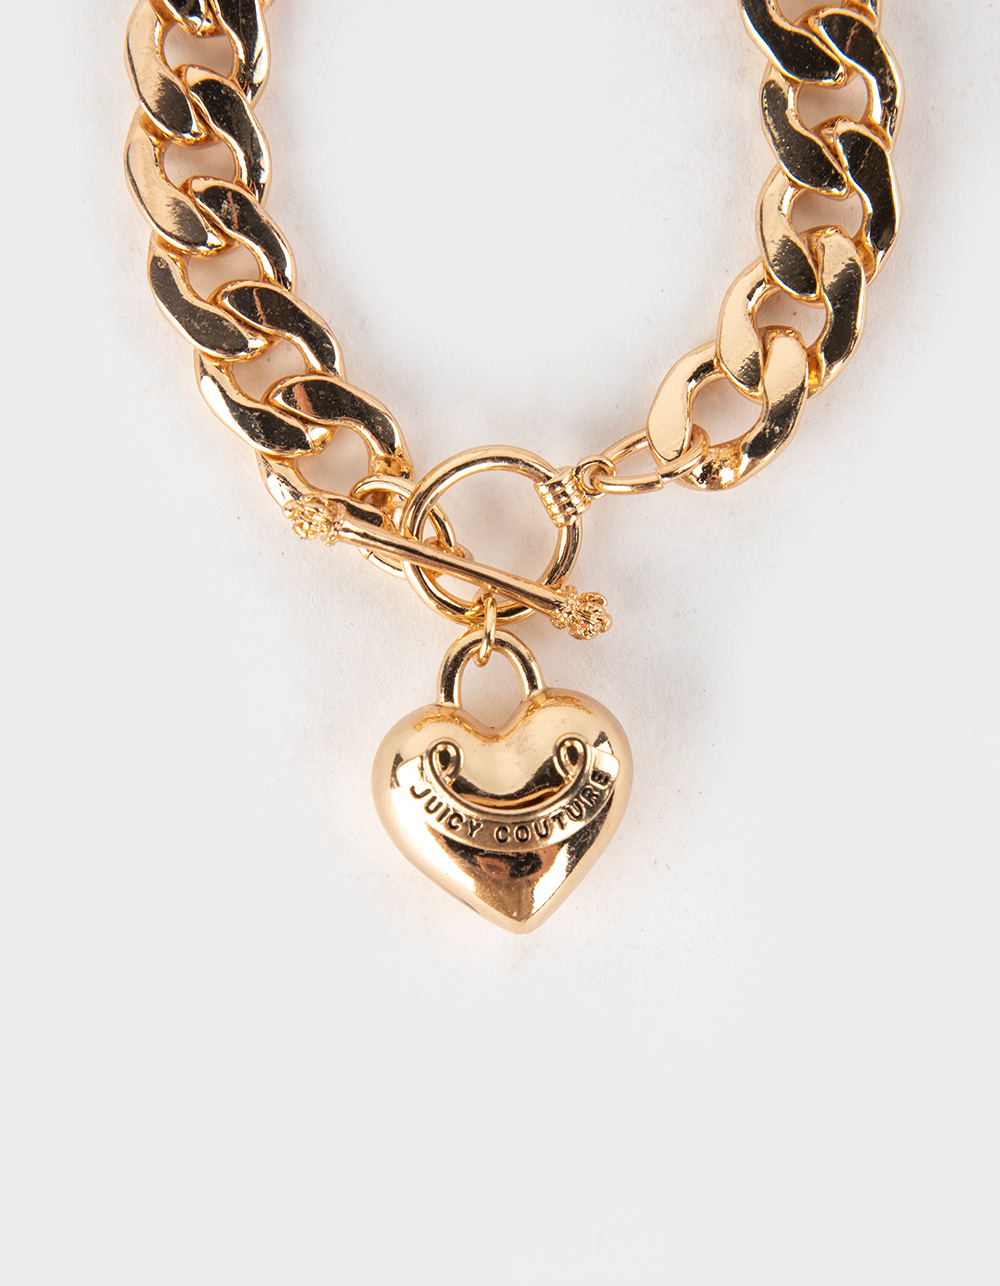 Juicy Couture Jewelry